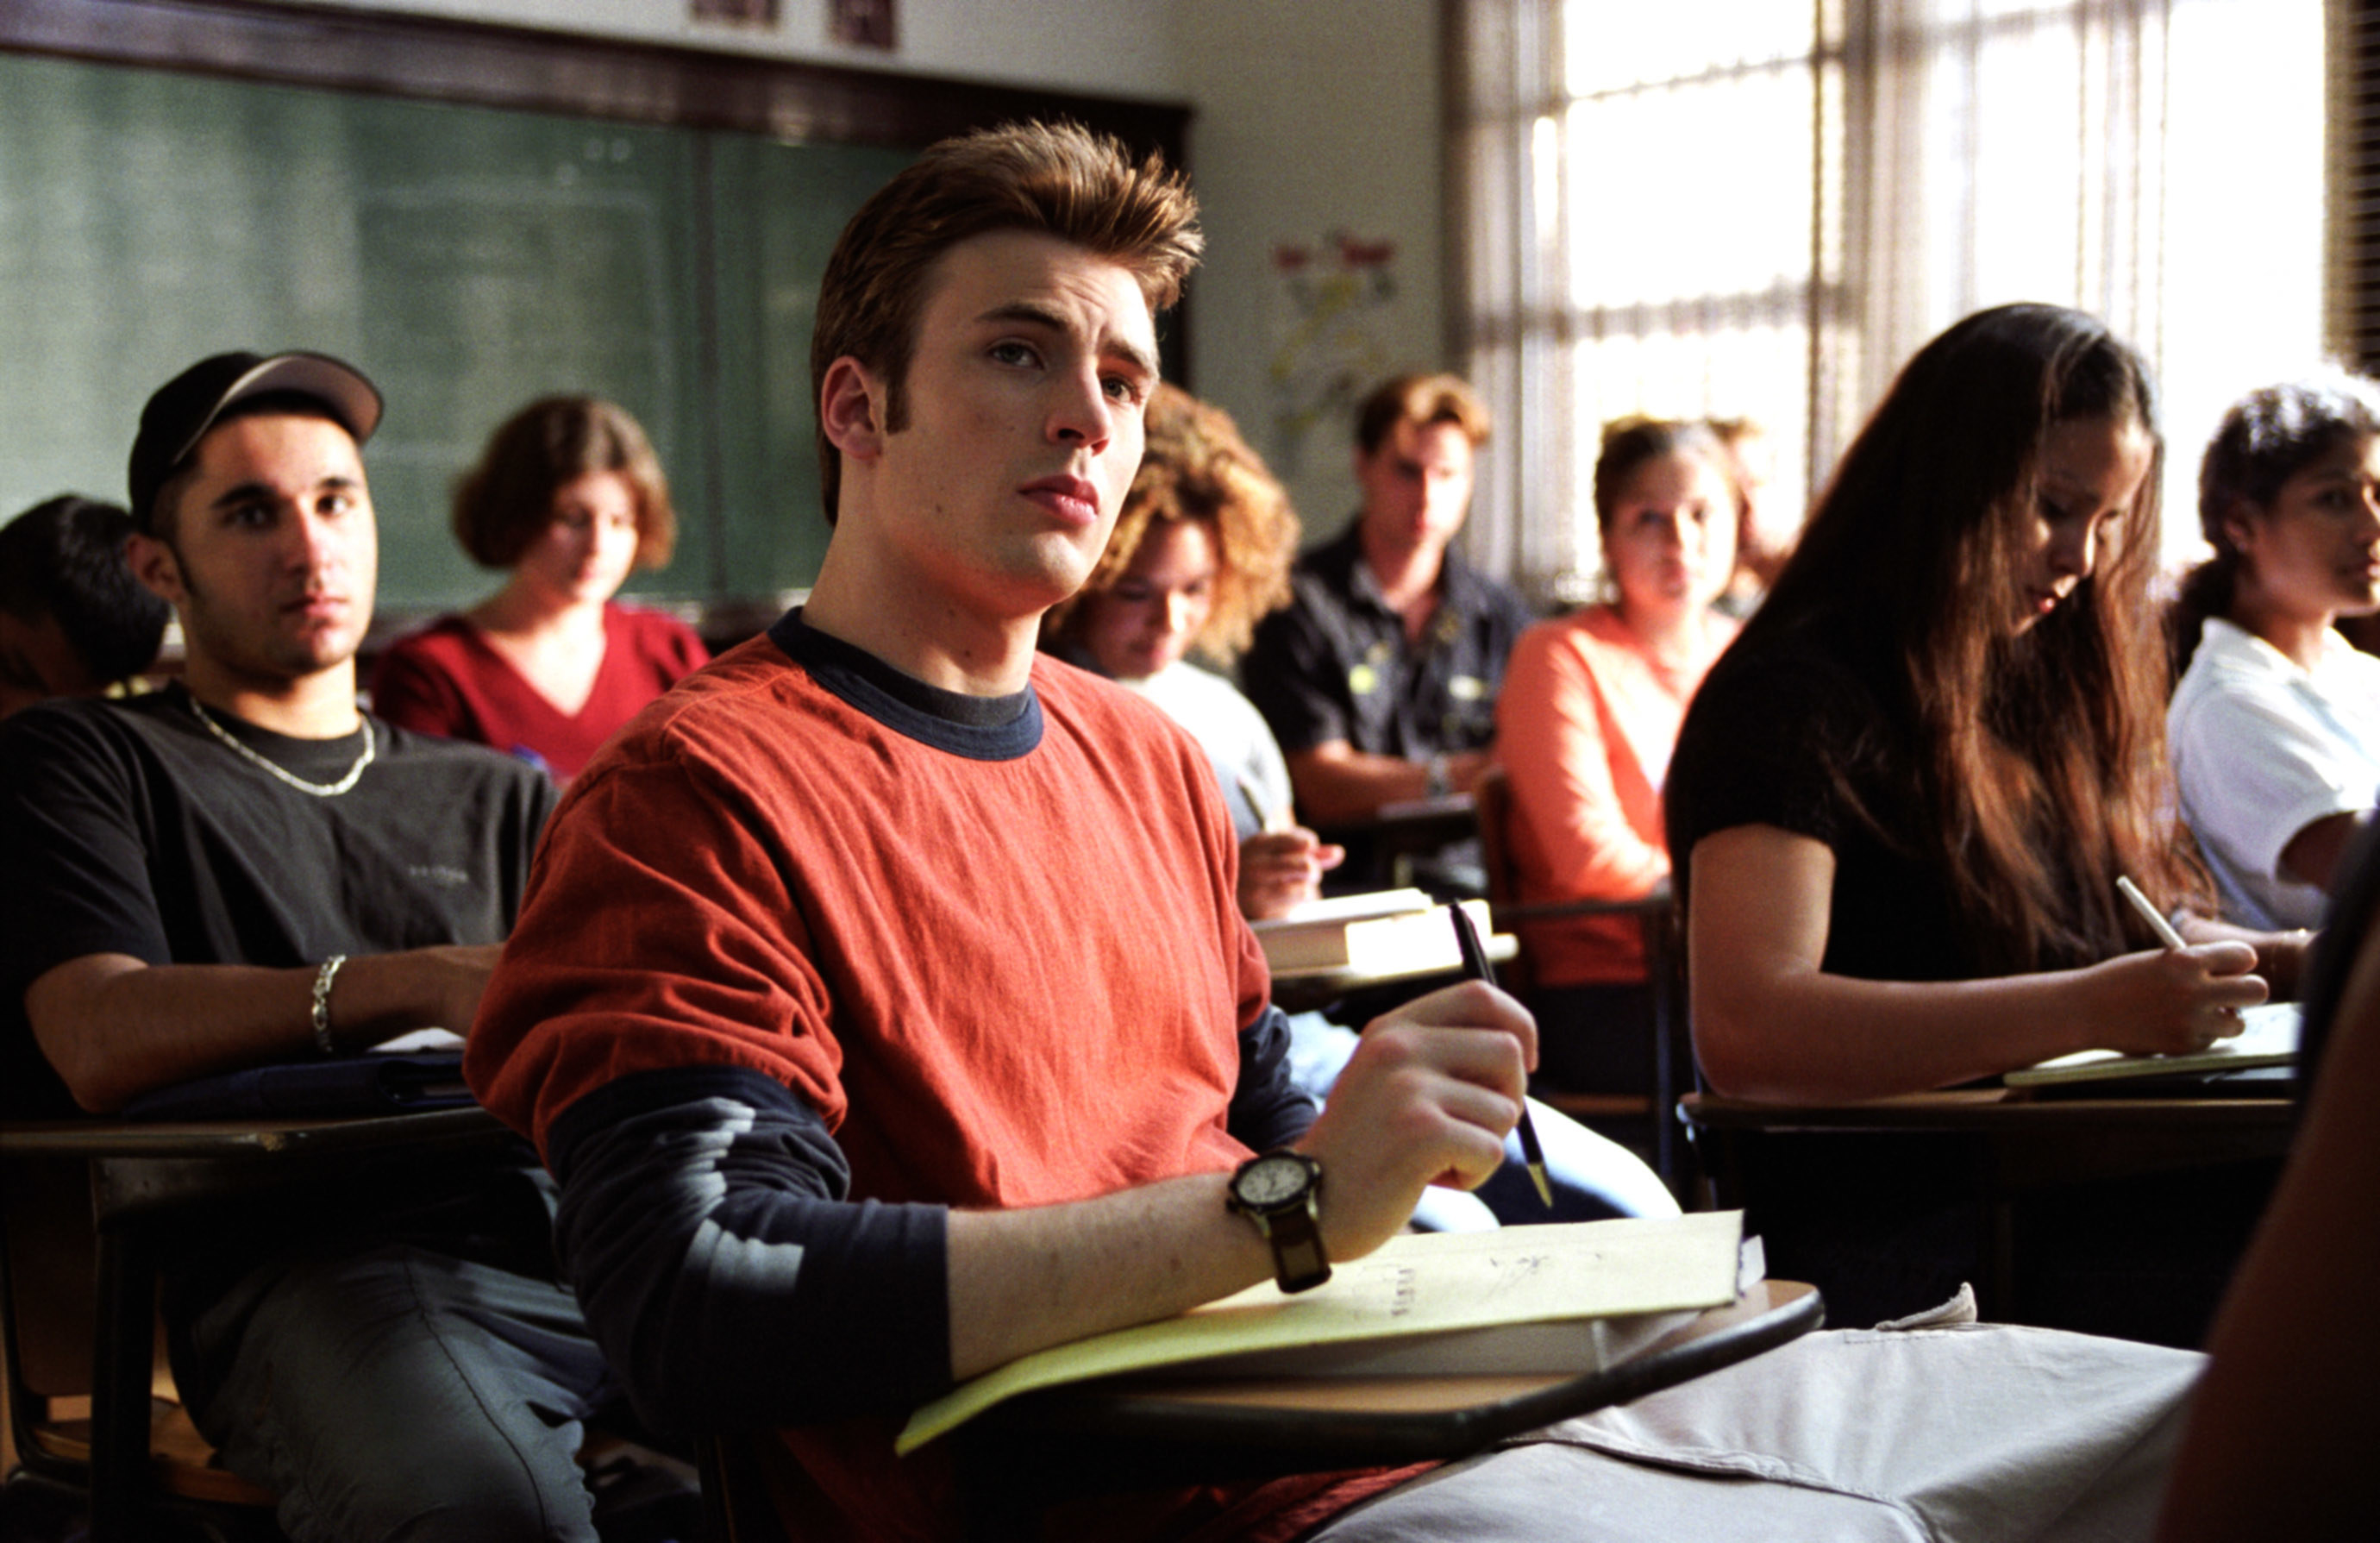 Chris Evans in a scene from the movie sitting in a classroom and taking notes